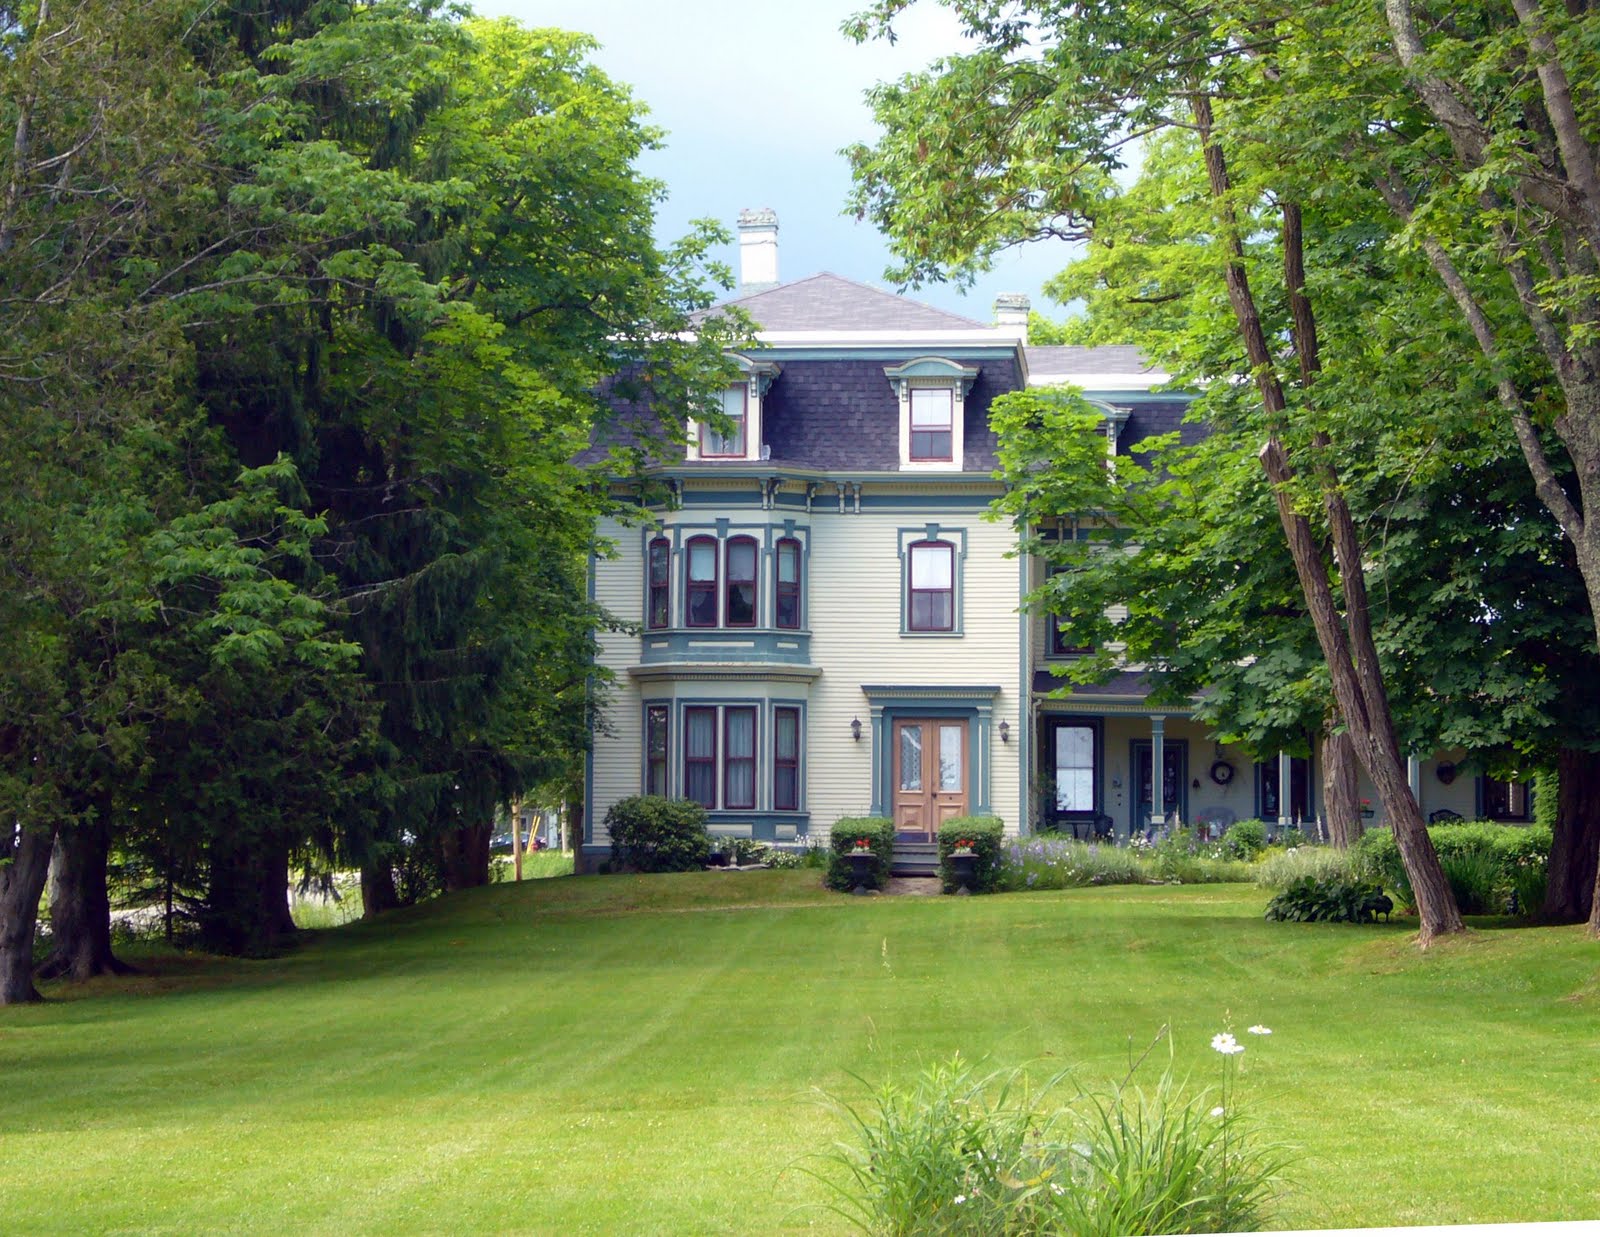 A Proper Bostonian: More from Maine: Searsport Houses